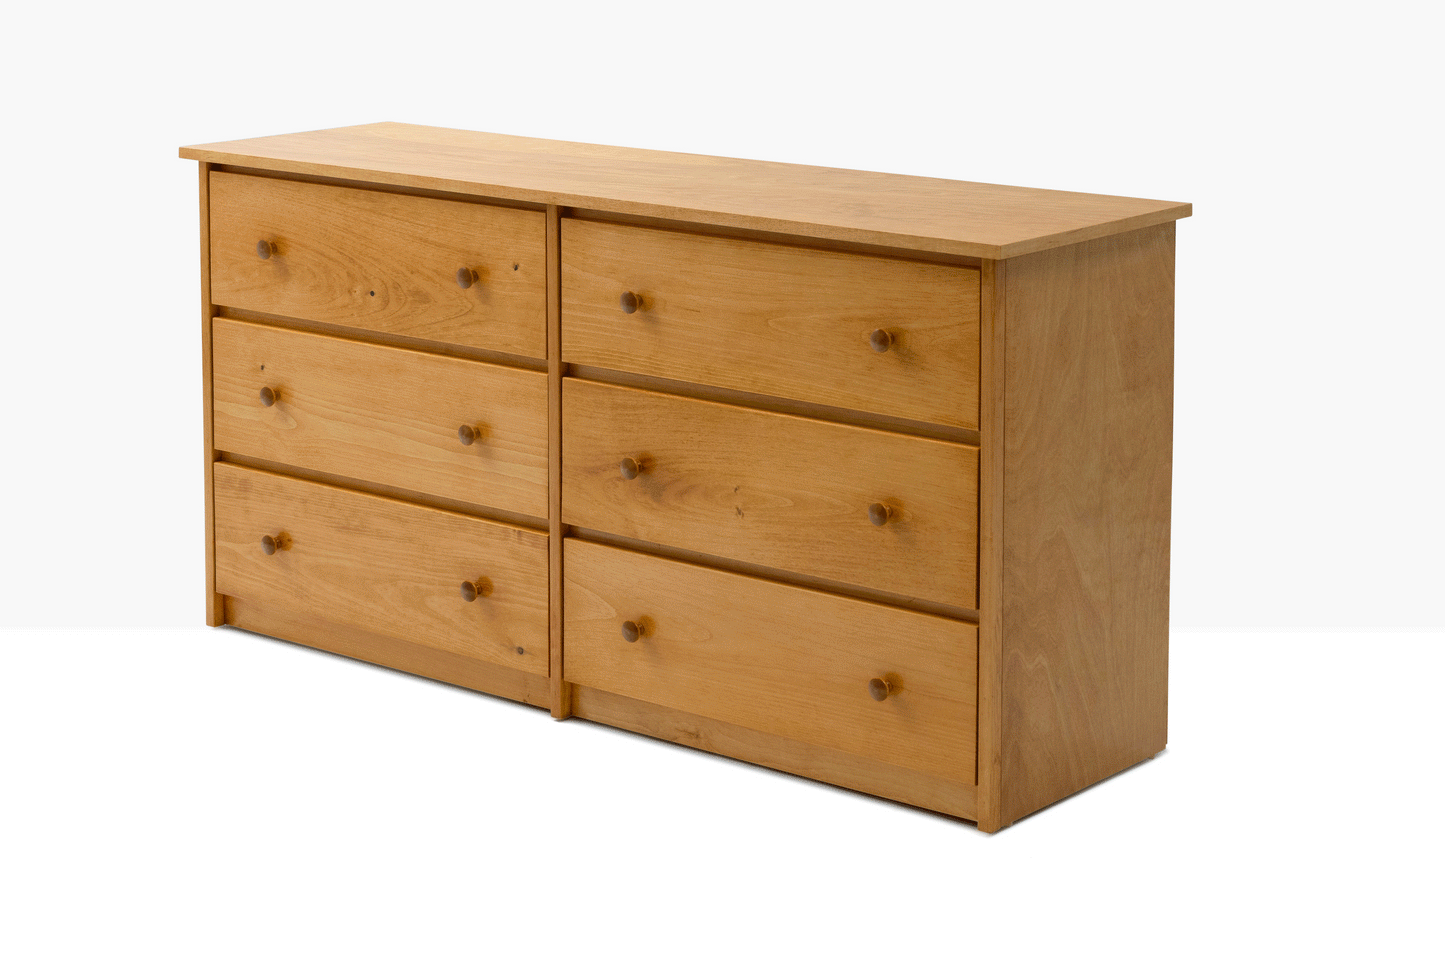 Evergreen Dresser in Meadow Oak finish, shown with drawers open to show storage space. Constructed from pine and birch.